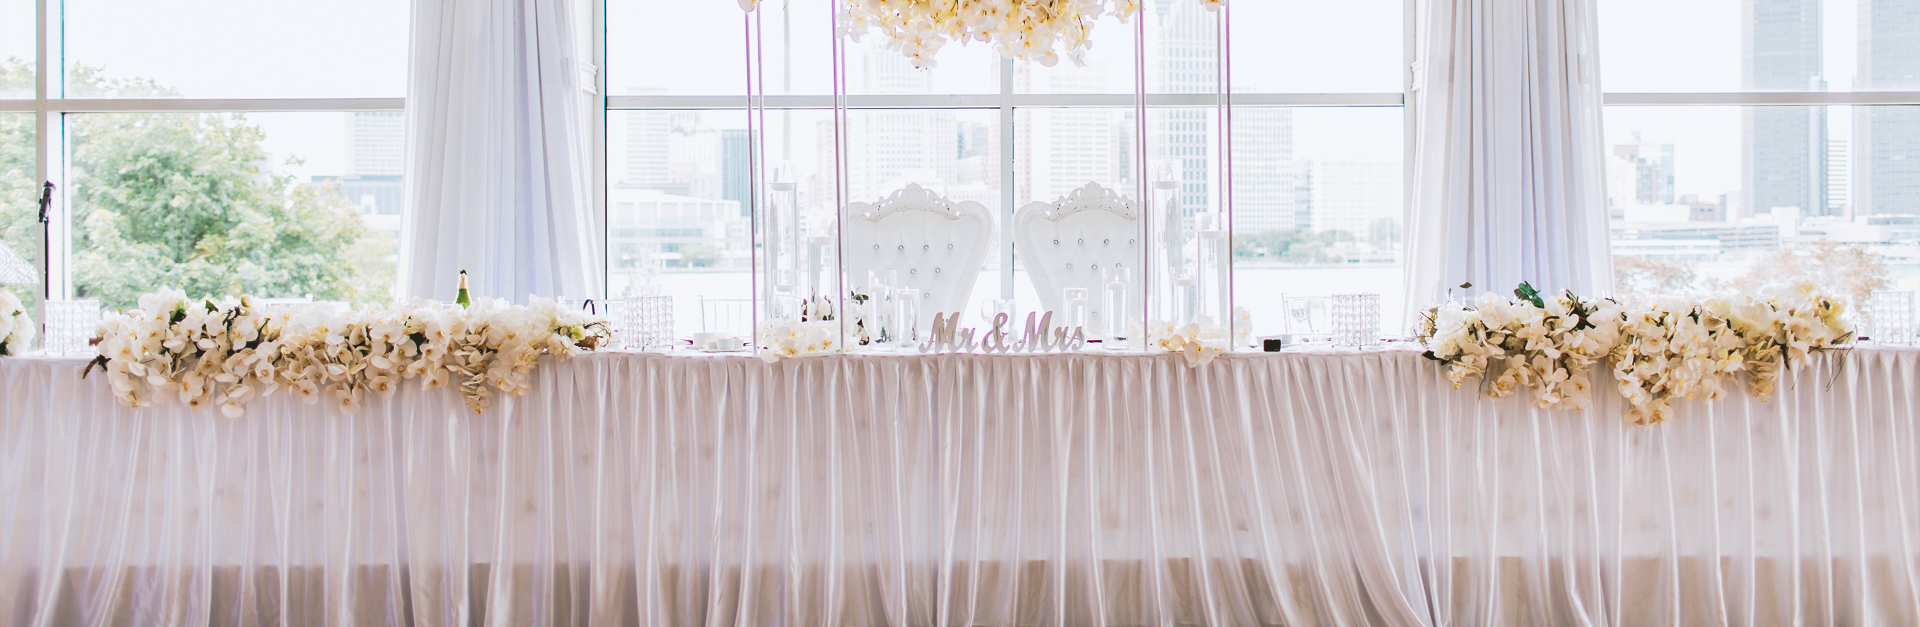 Head table in front of window